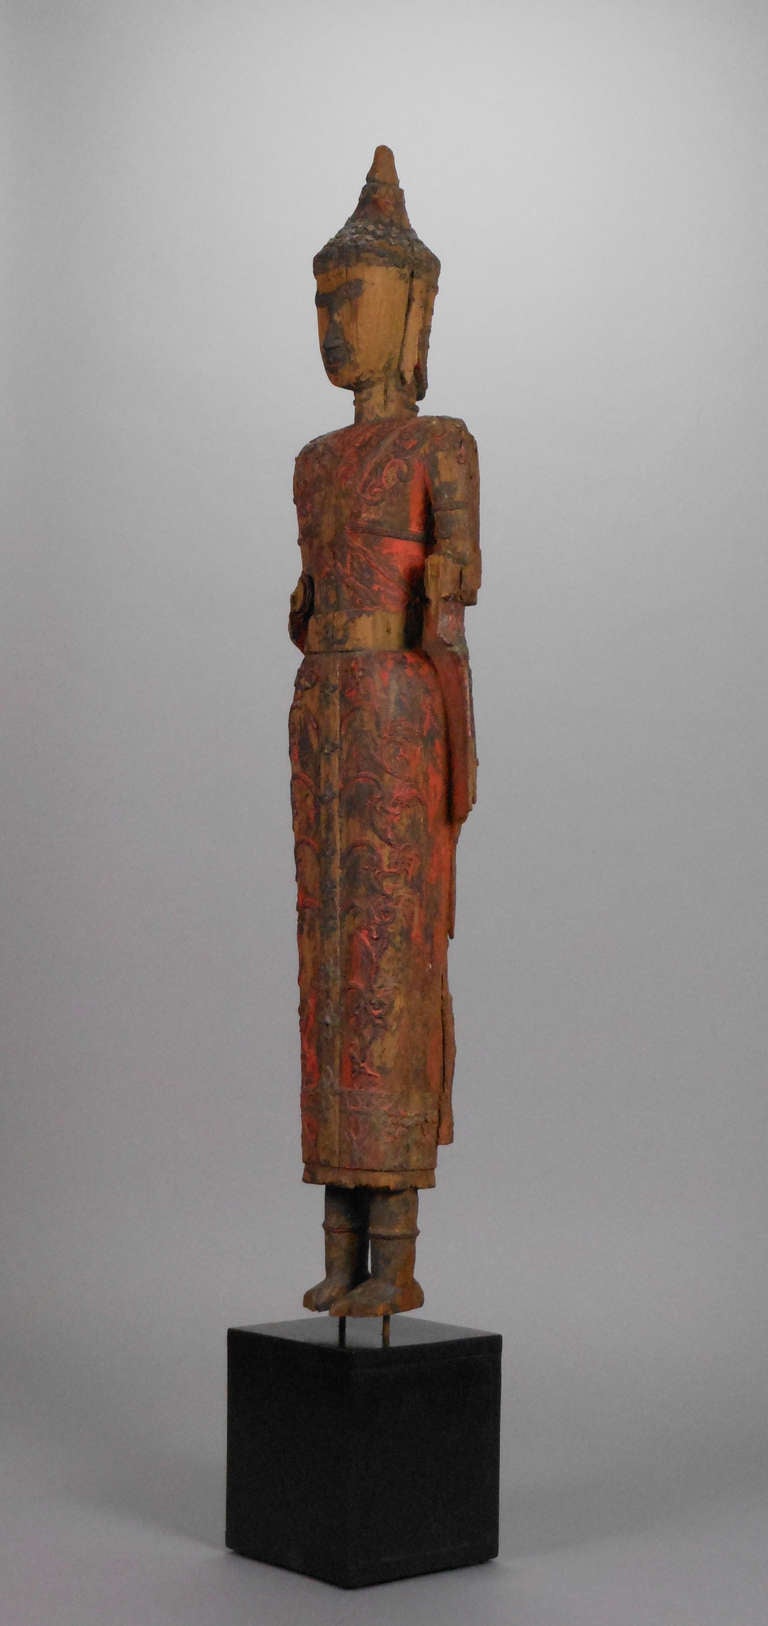 The Thai carved, elongated figure of the Buddha has a beautiful red and black patina surface. The scrolling relief on the Buddha's robe suggests elaborate embroidery. The standing Buddha faces forward; the missing forearms suggest the abhaya mudra